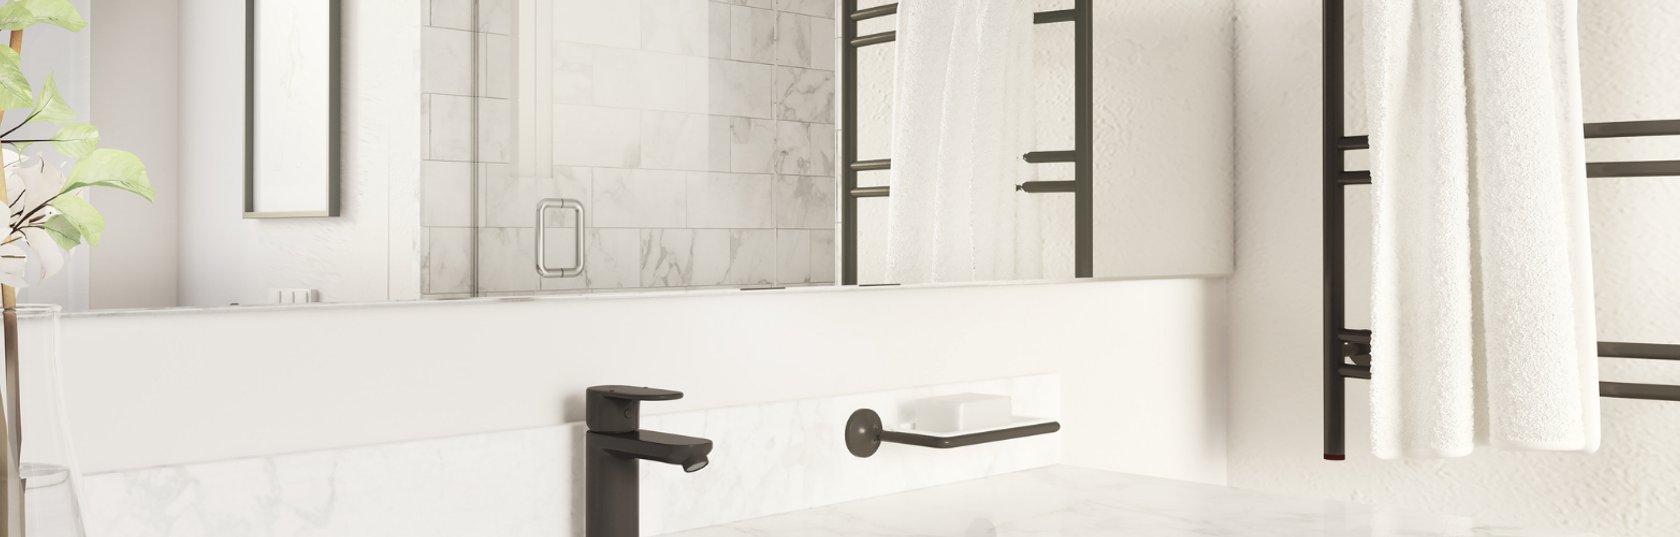 Small changes you can do to make your bathroom more luxurious